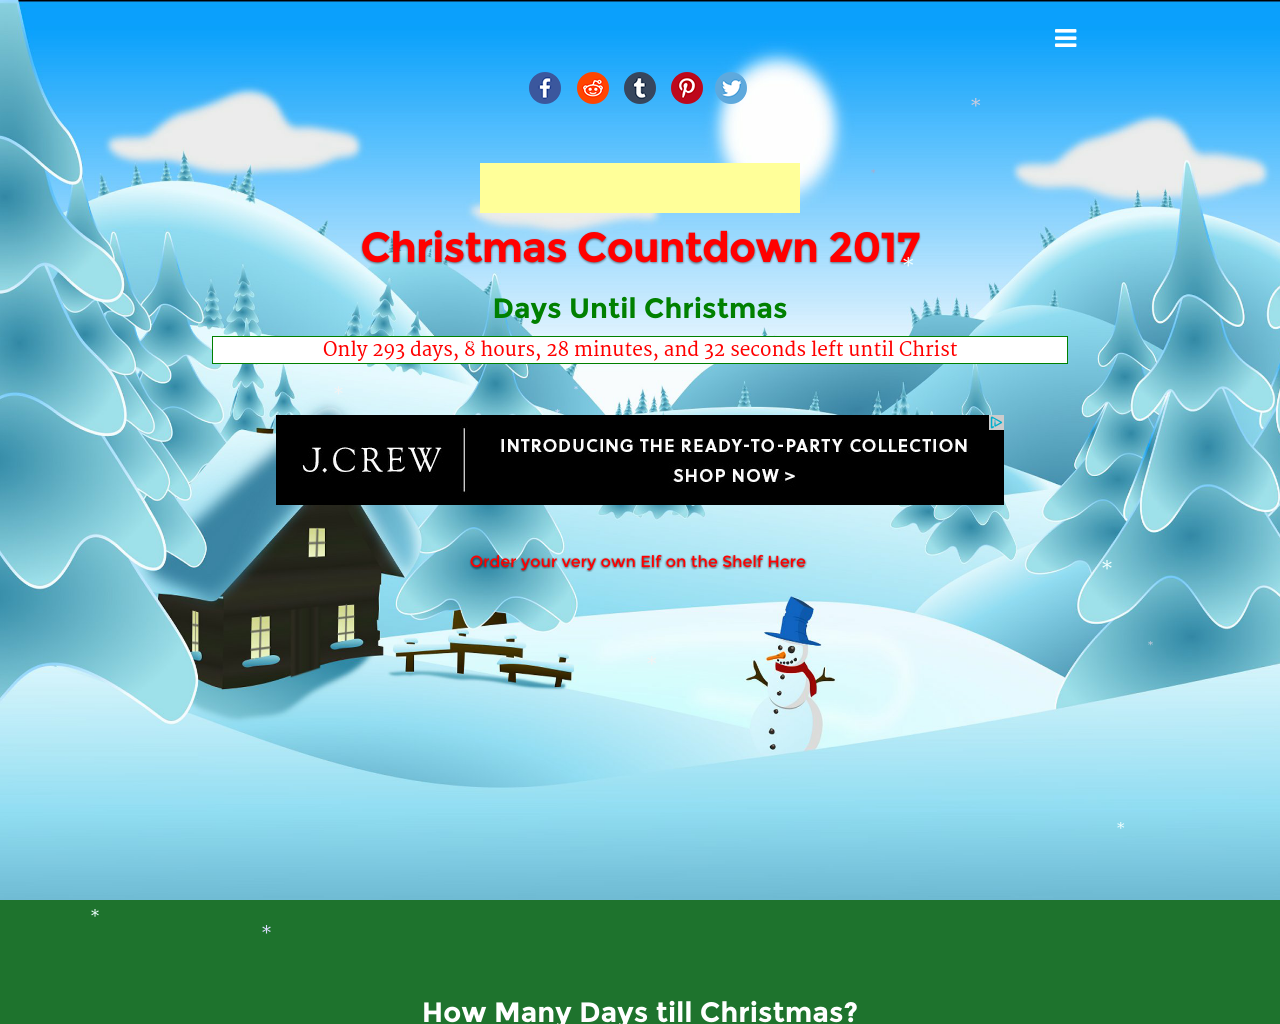 Image site christmascountdown.org in 1280x1024